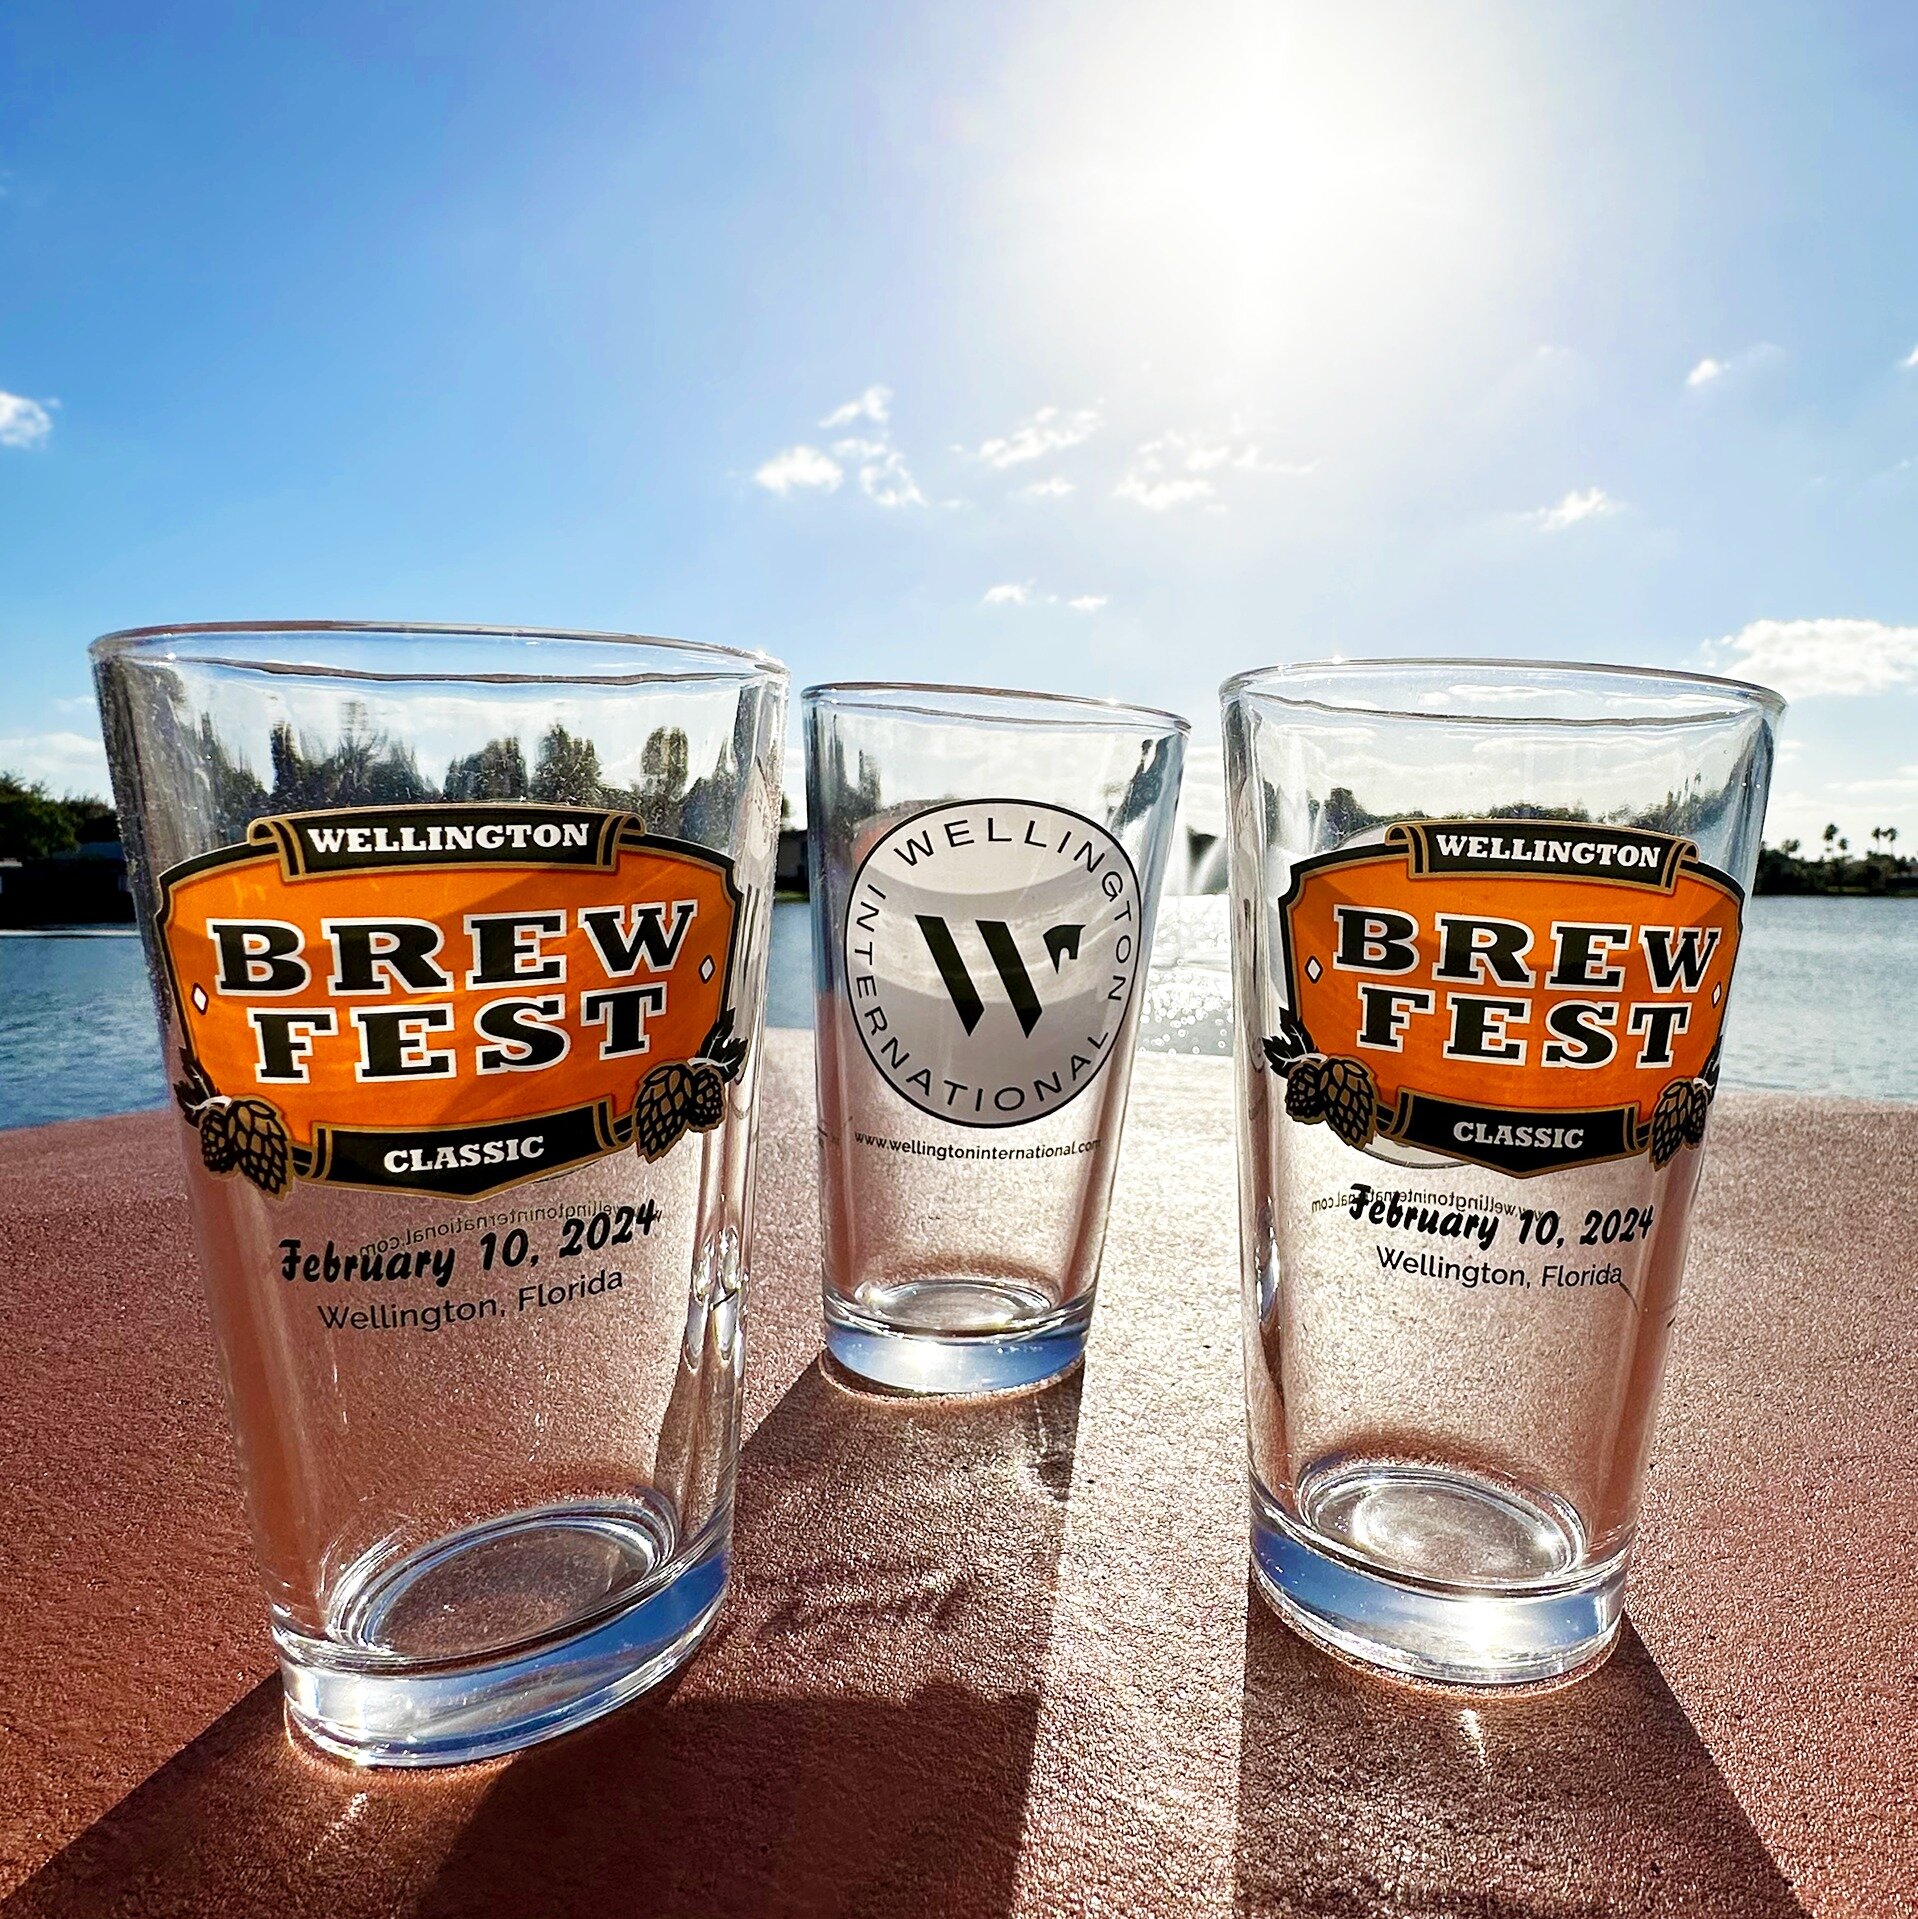 When the glassware gets here you know Brew Fest is near! 🍺😃 Thank you to Wellington International for sponsoring our keepsake pint glasses for this Saturday's event. 

Still need to get your tickets? 🎟️ Head to wellingtonclassicbrewfest.com to get